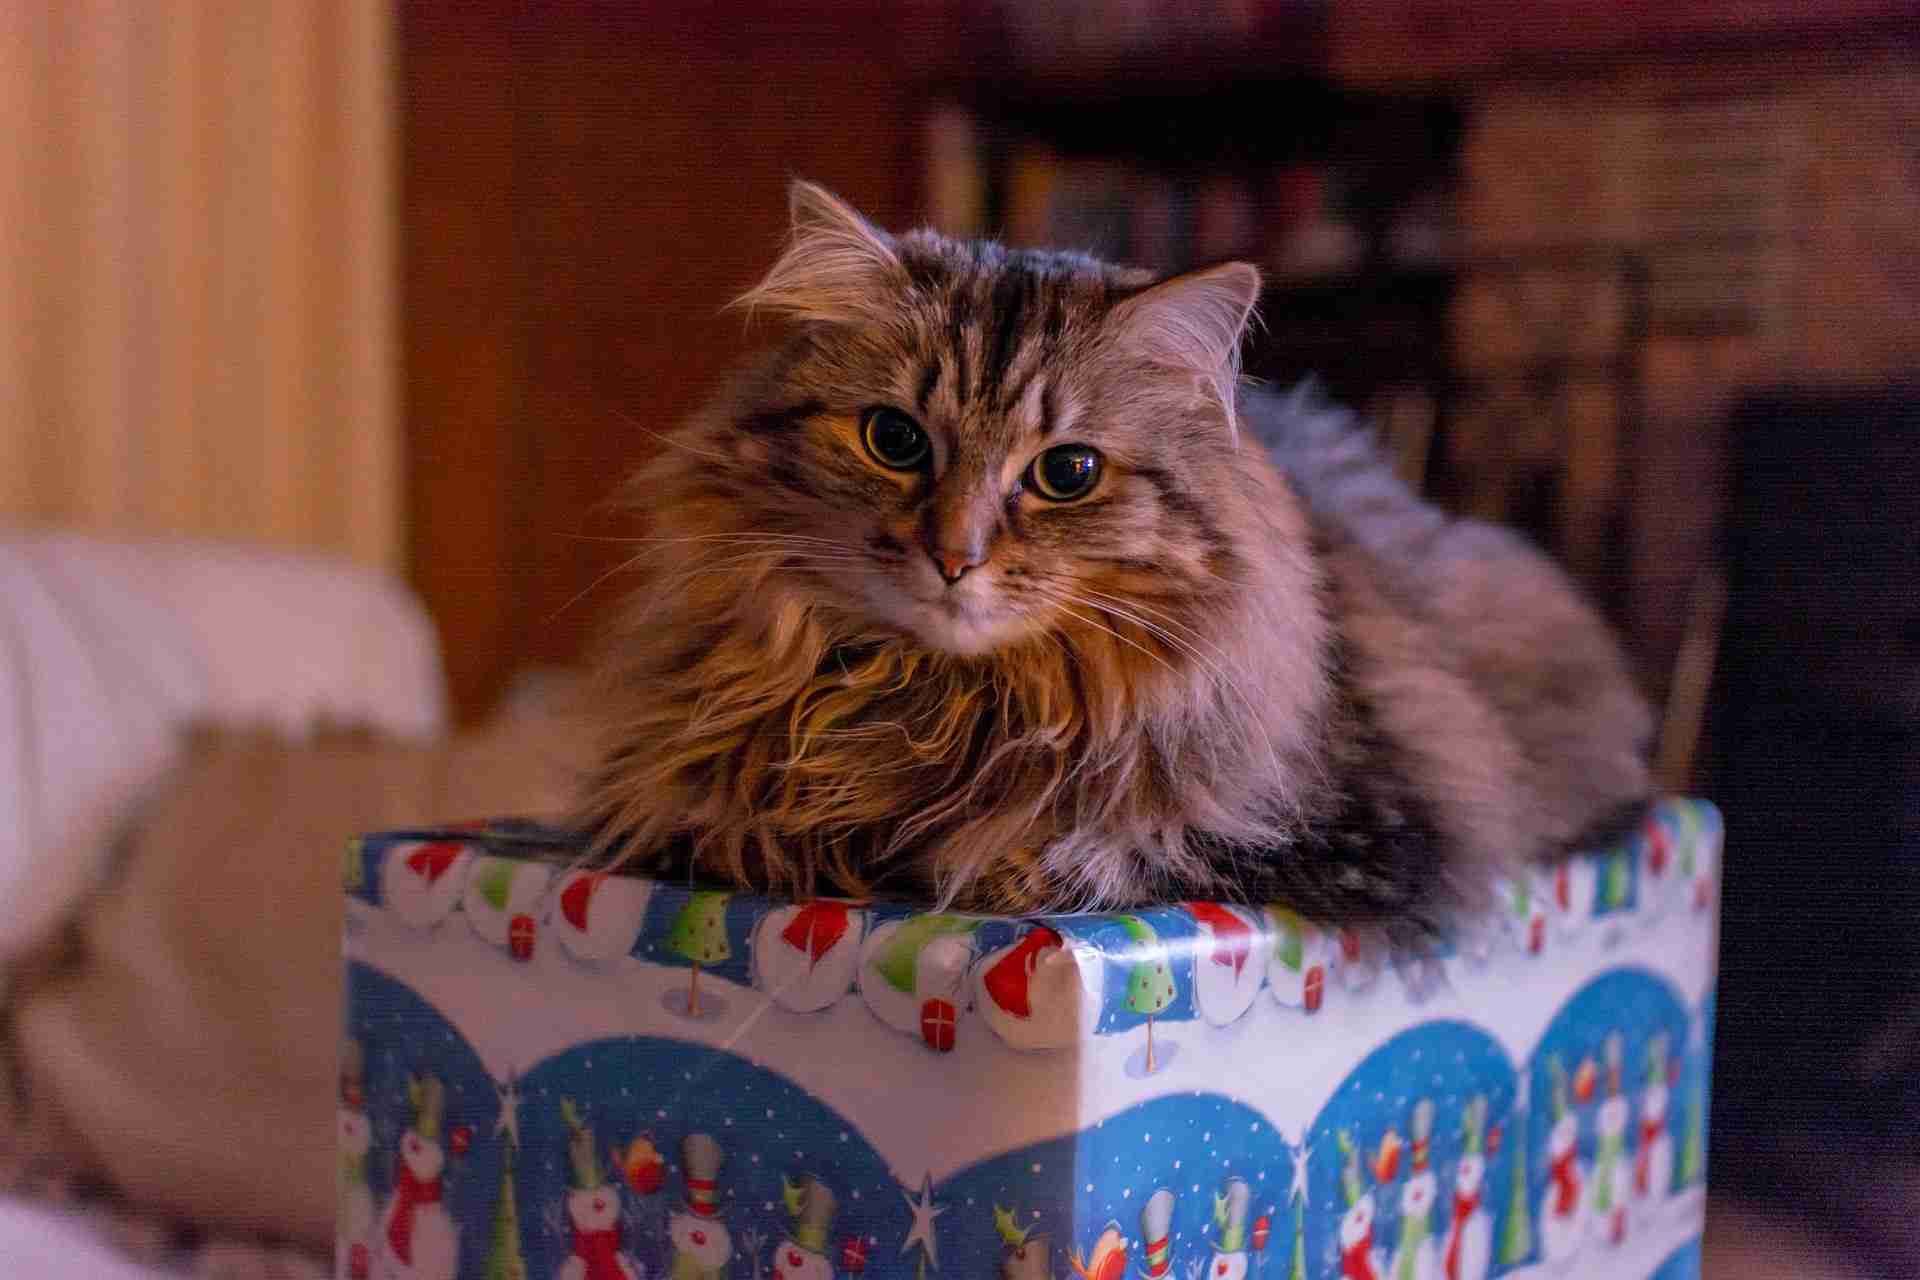 Three alternatives for giving an animal as a Christmas gift